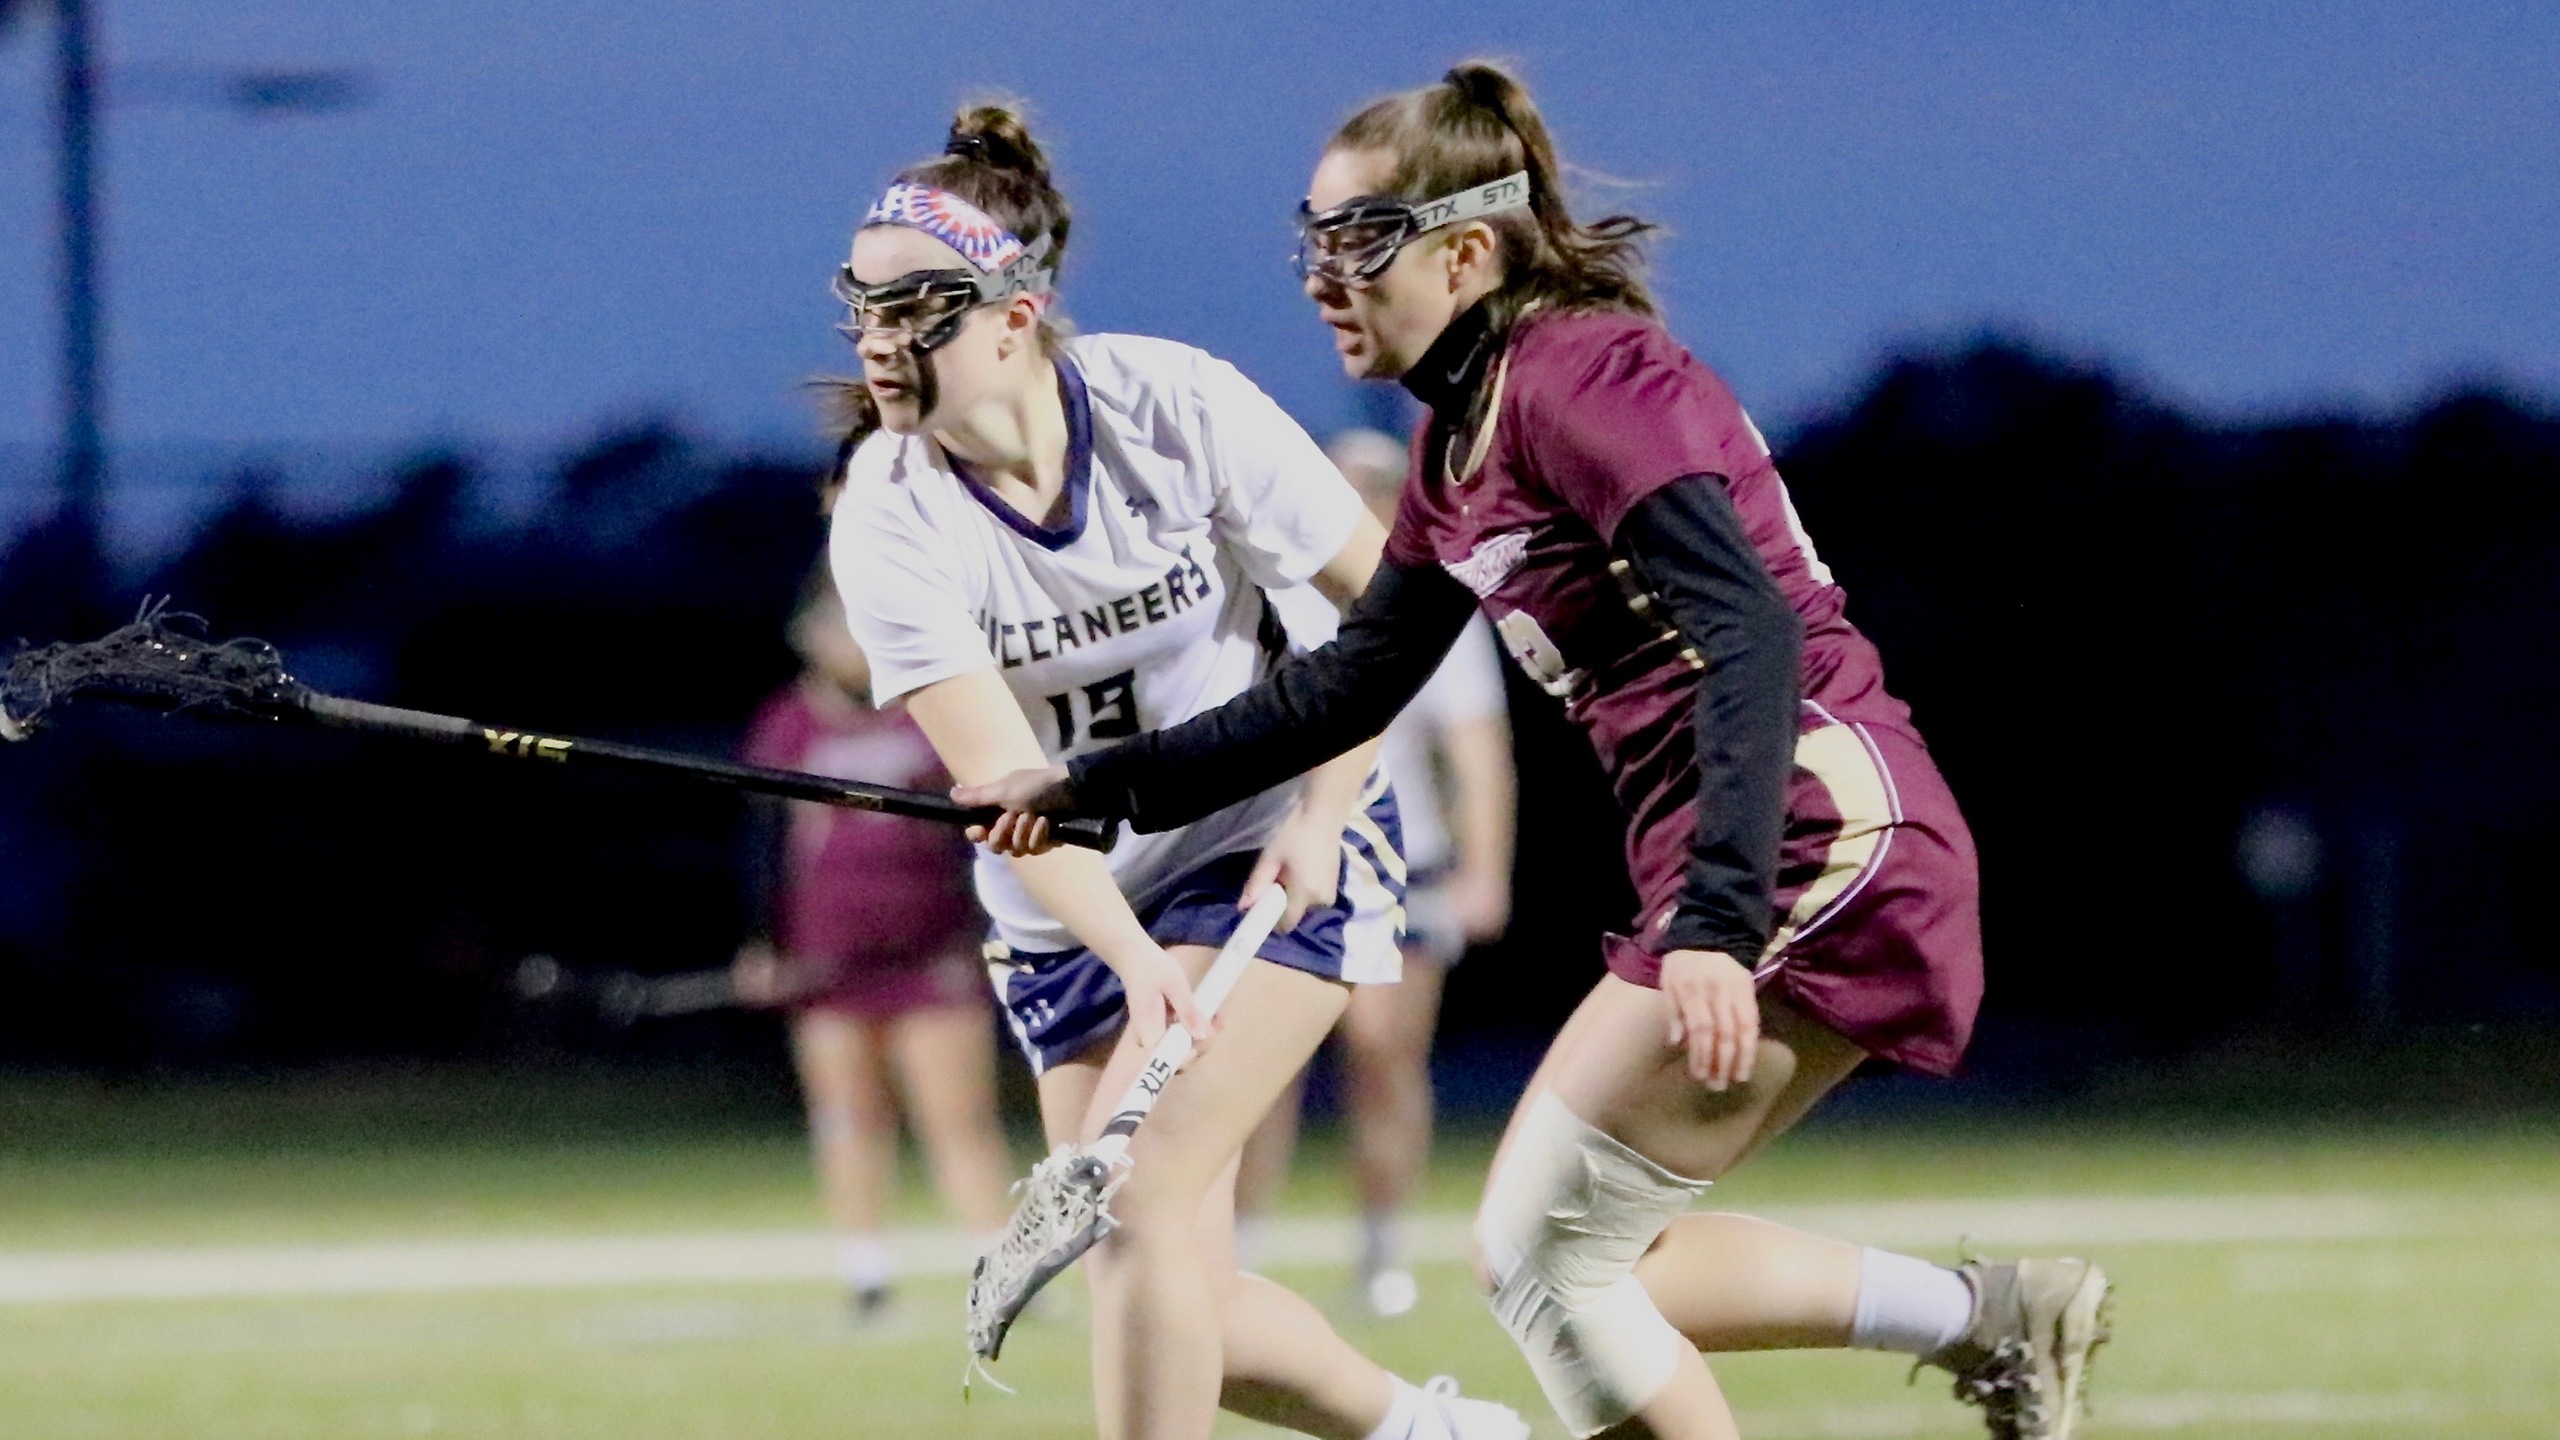 Women's Lacrosse: Durgin Sets Career High in Win Over RIC